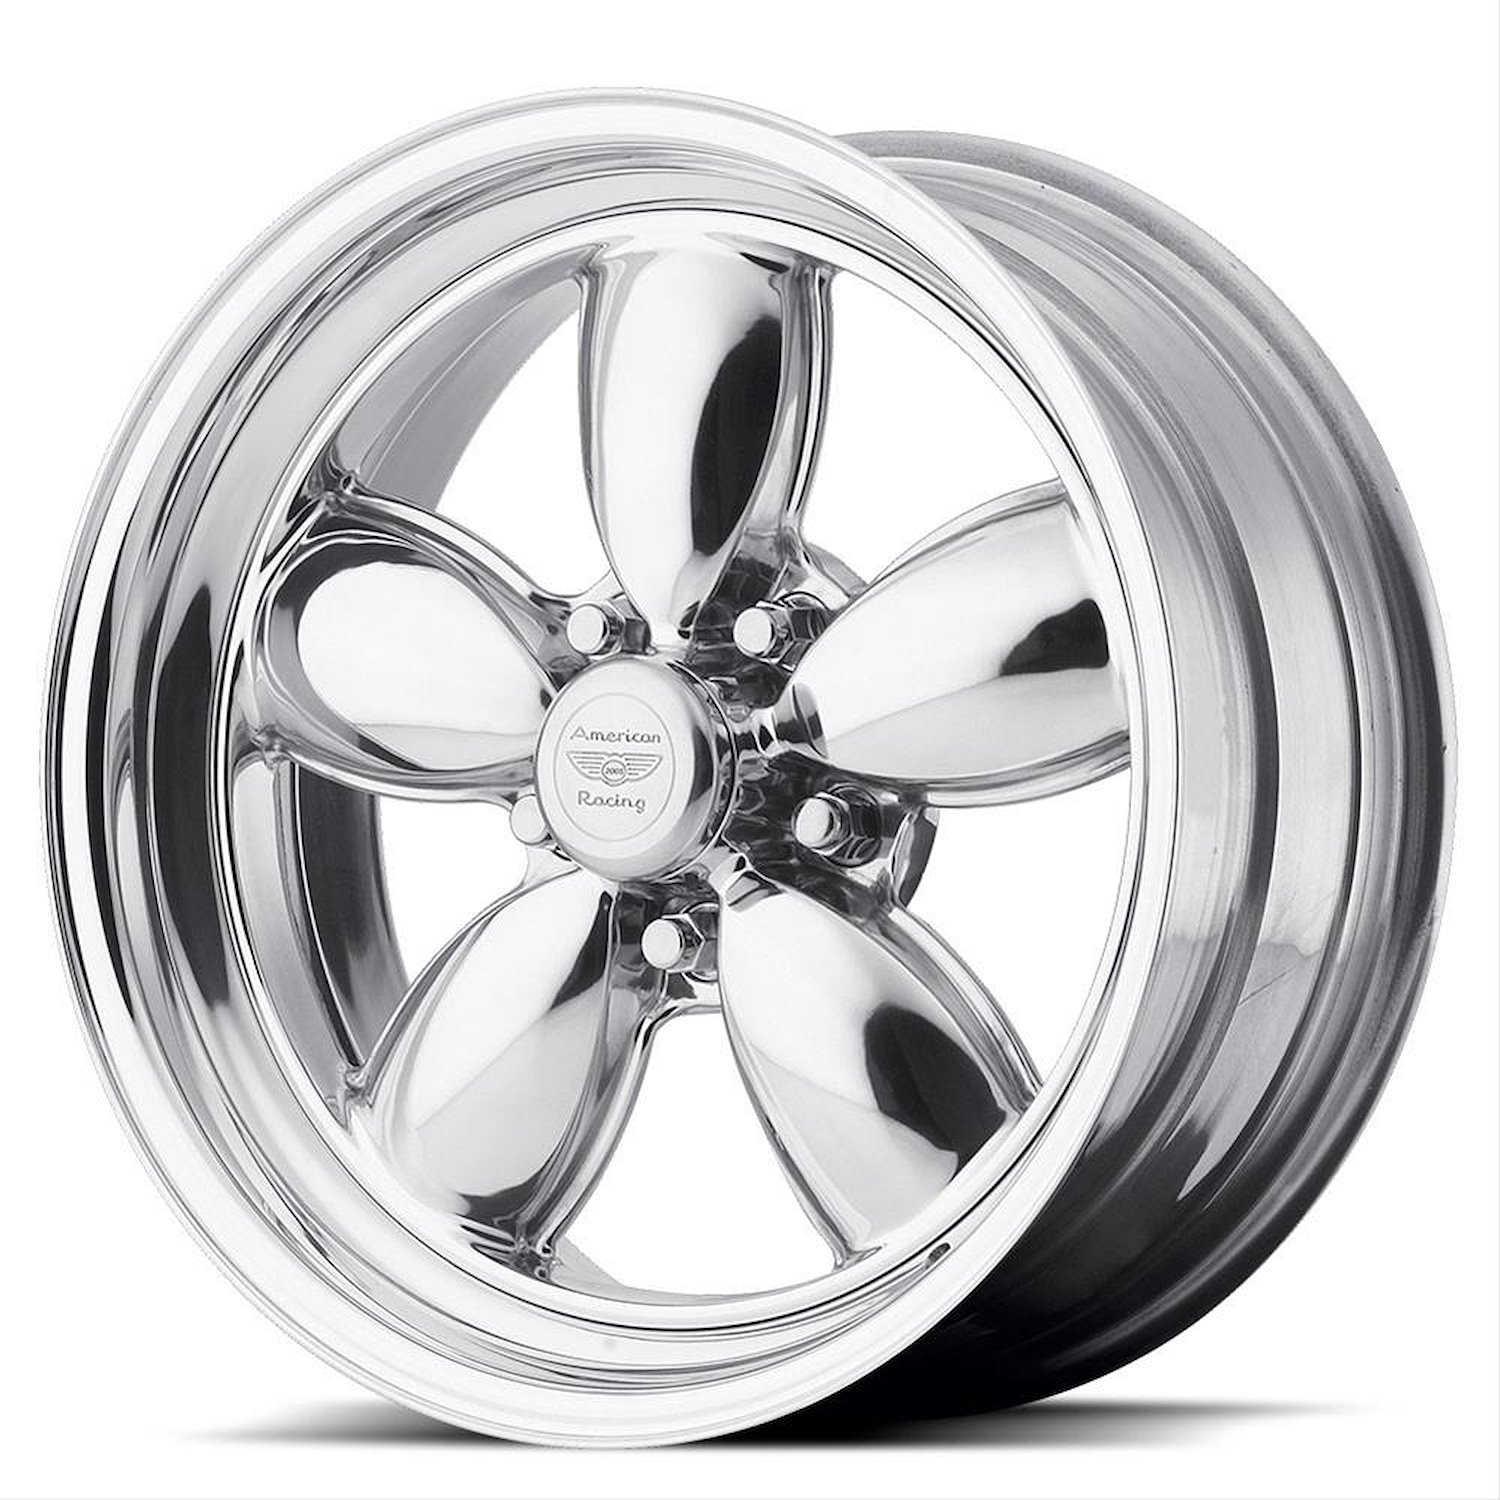 AMERICAN RACING CLASSIC 200S TWO-PIECE POLISHED 17 x 9.5 5x4.5 0 5.25